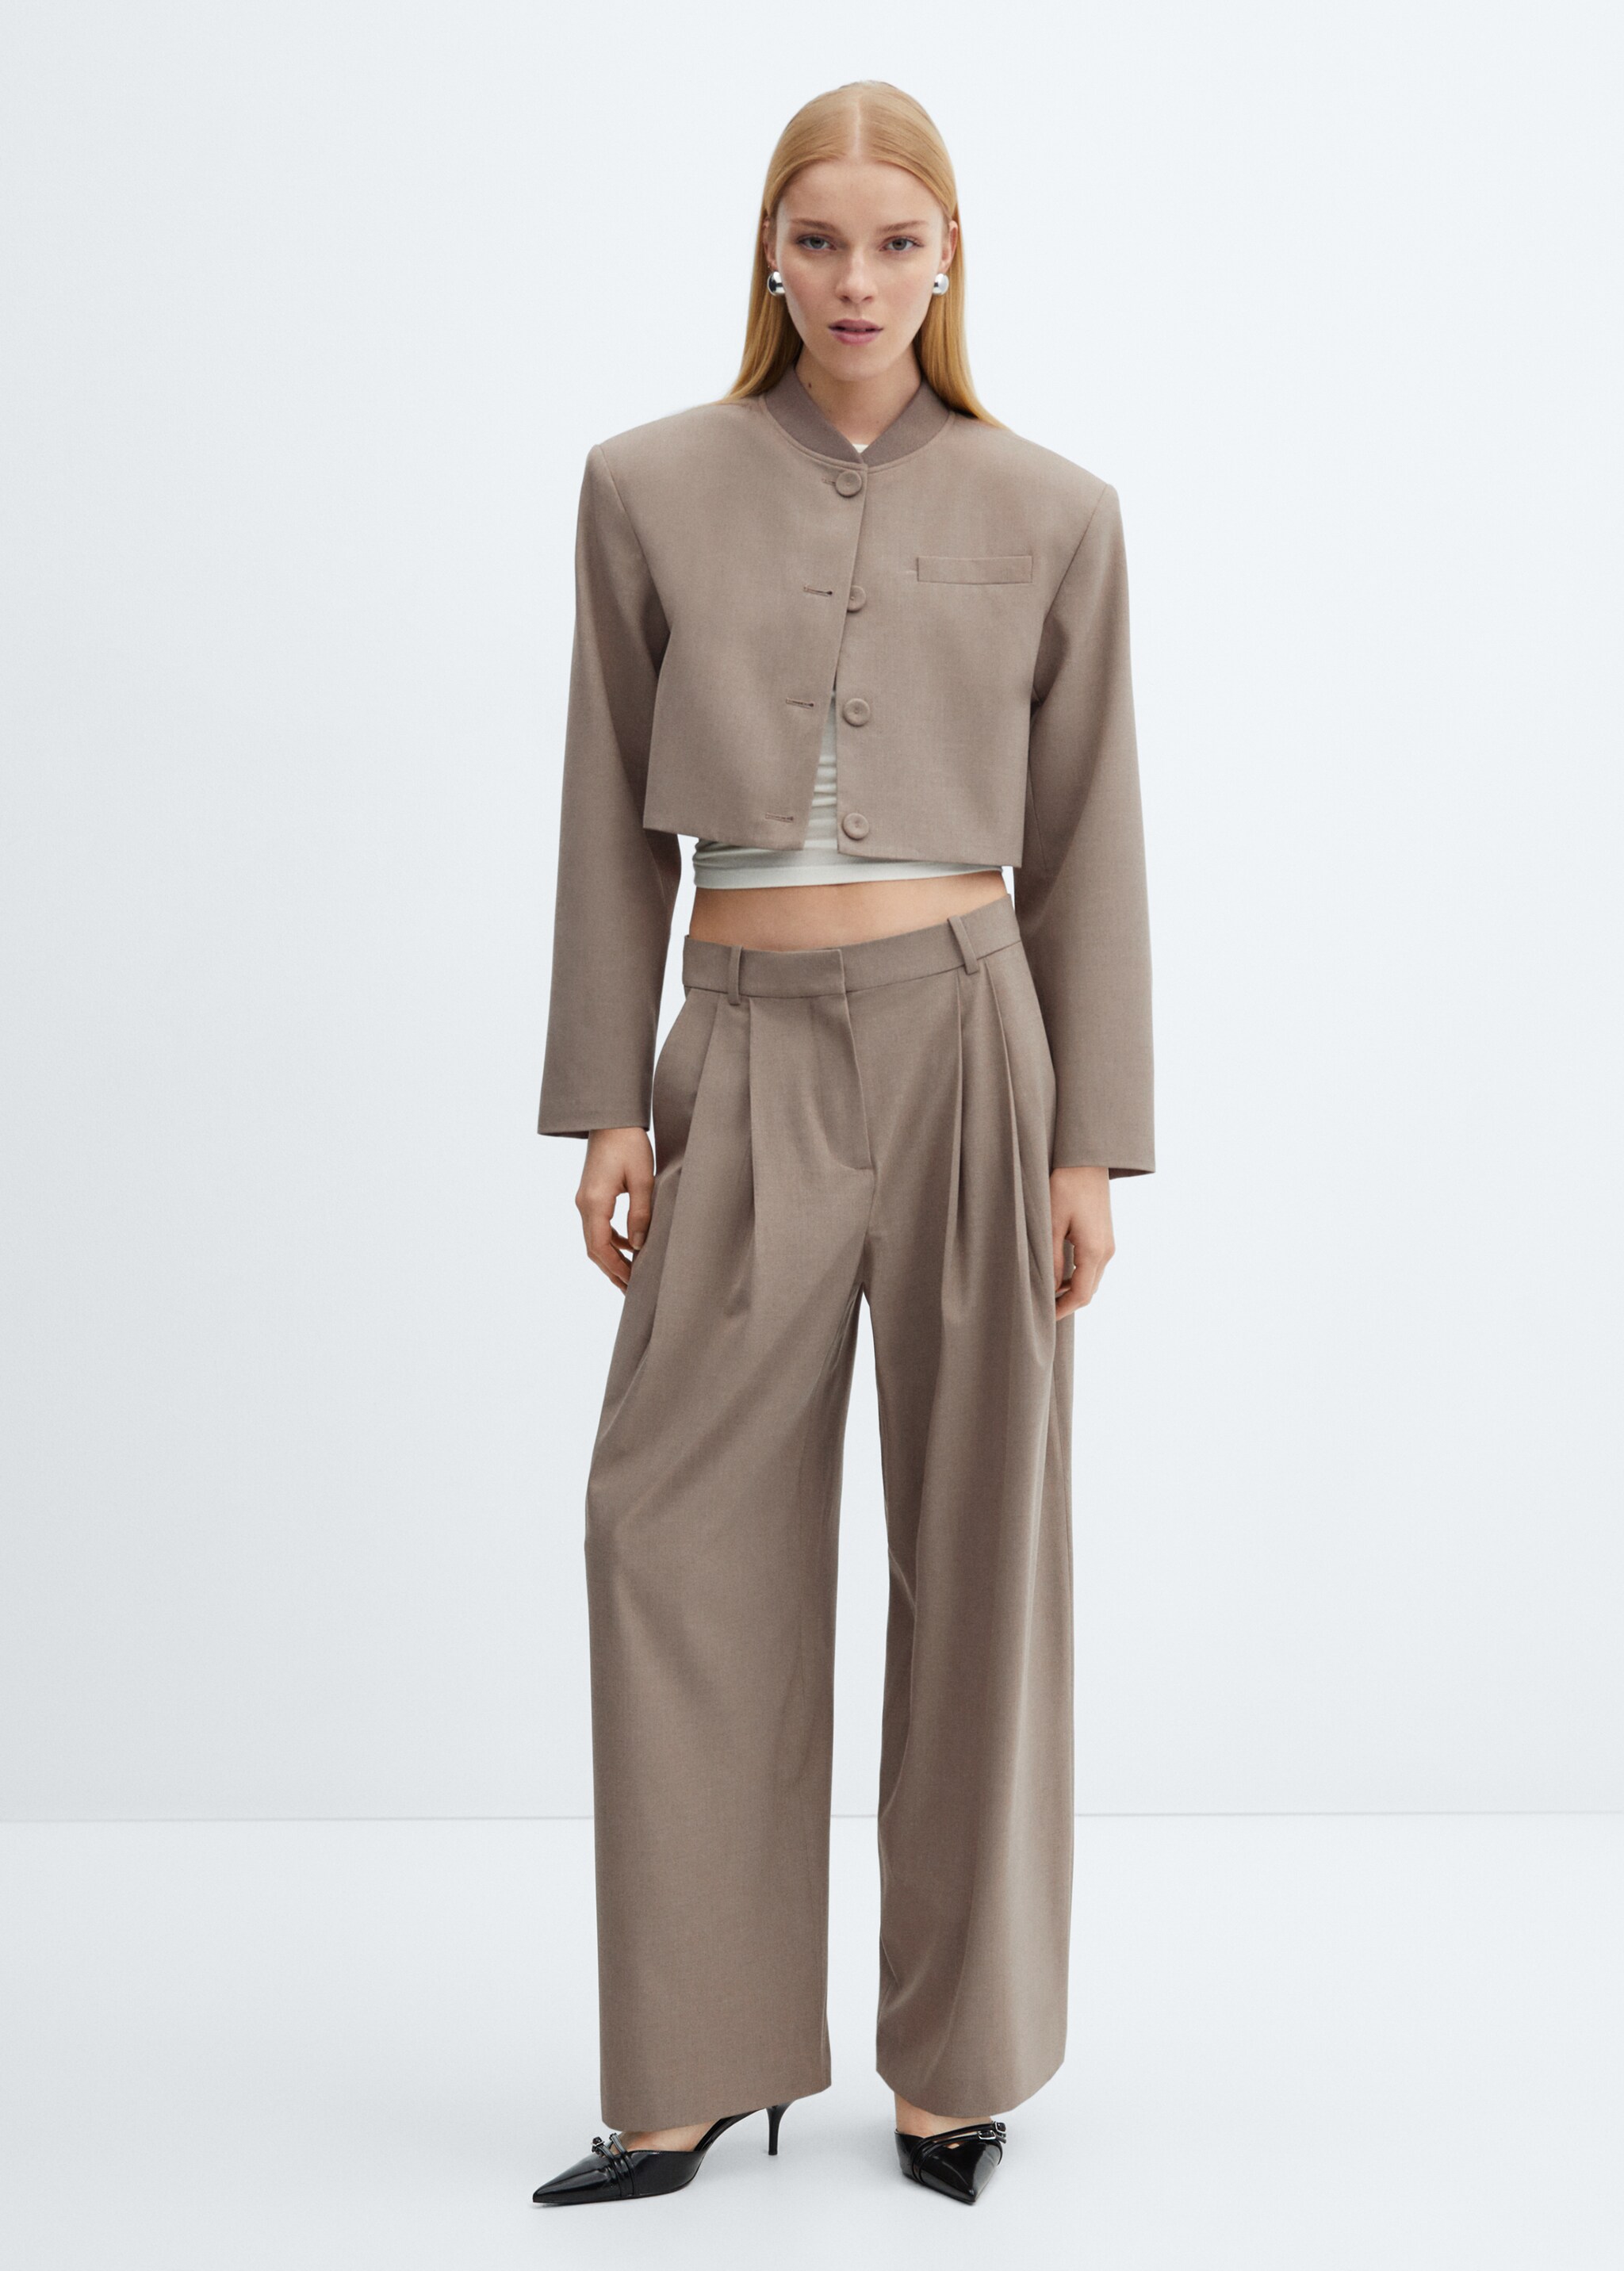 Buttoned cropped jacket - General plane